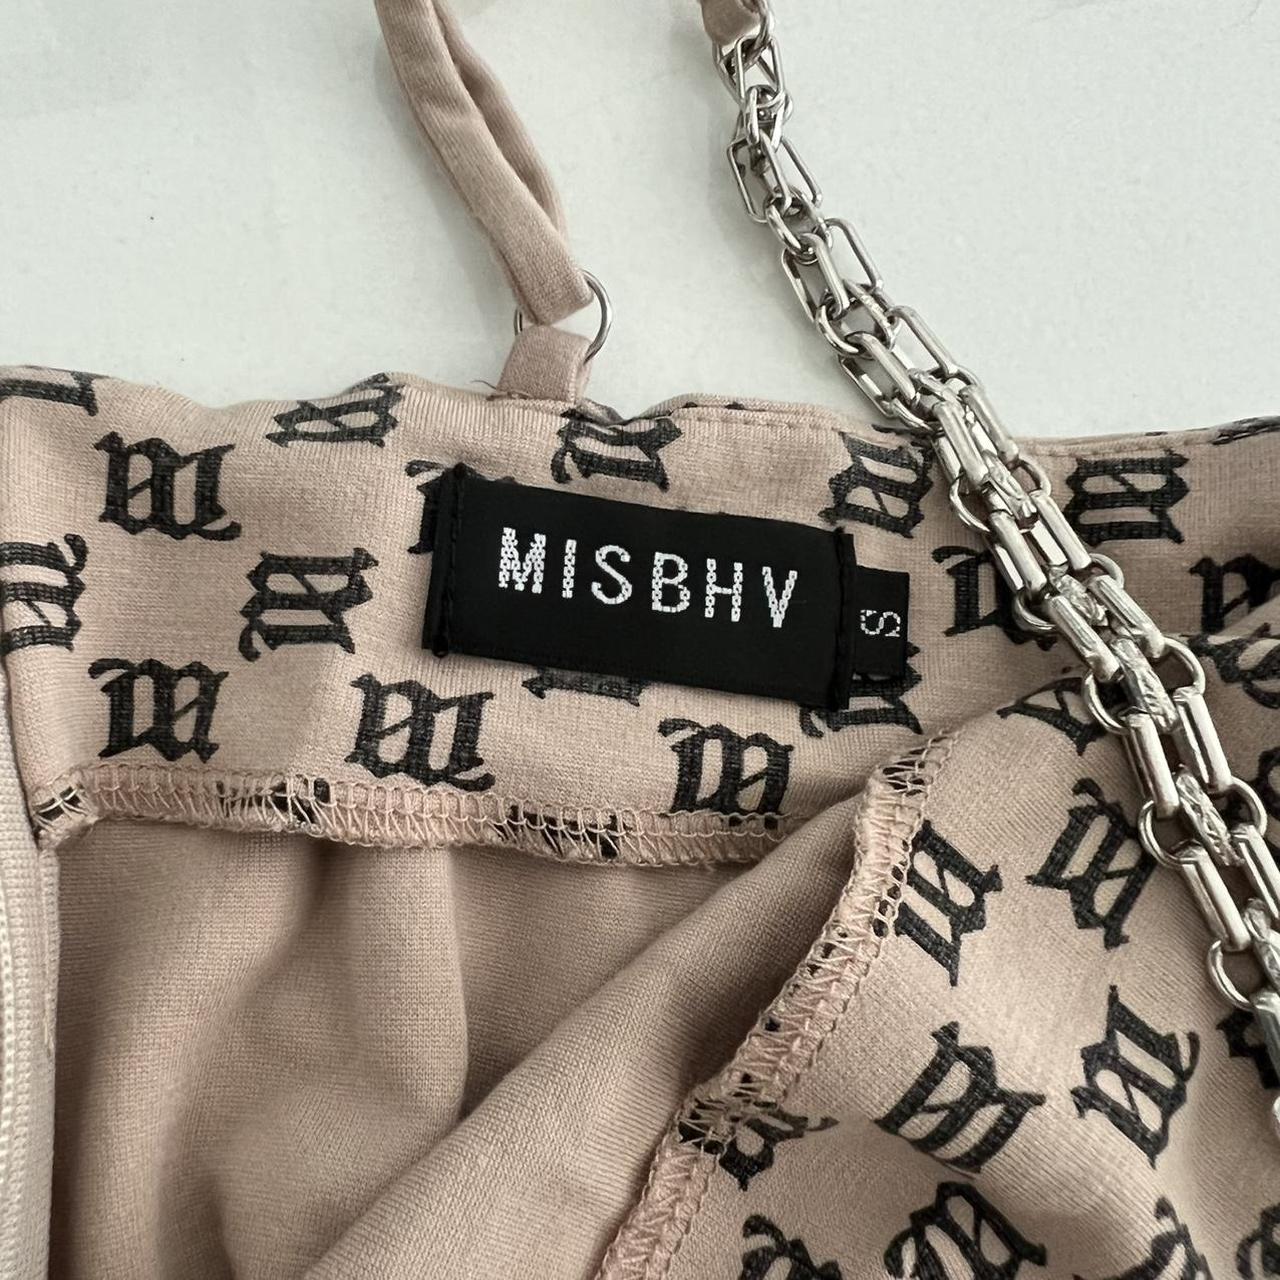 Product Image 3 - MISBHV silver chain logo top
Size: